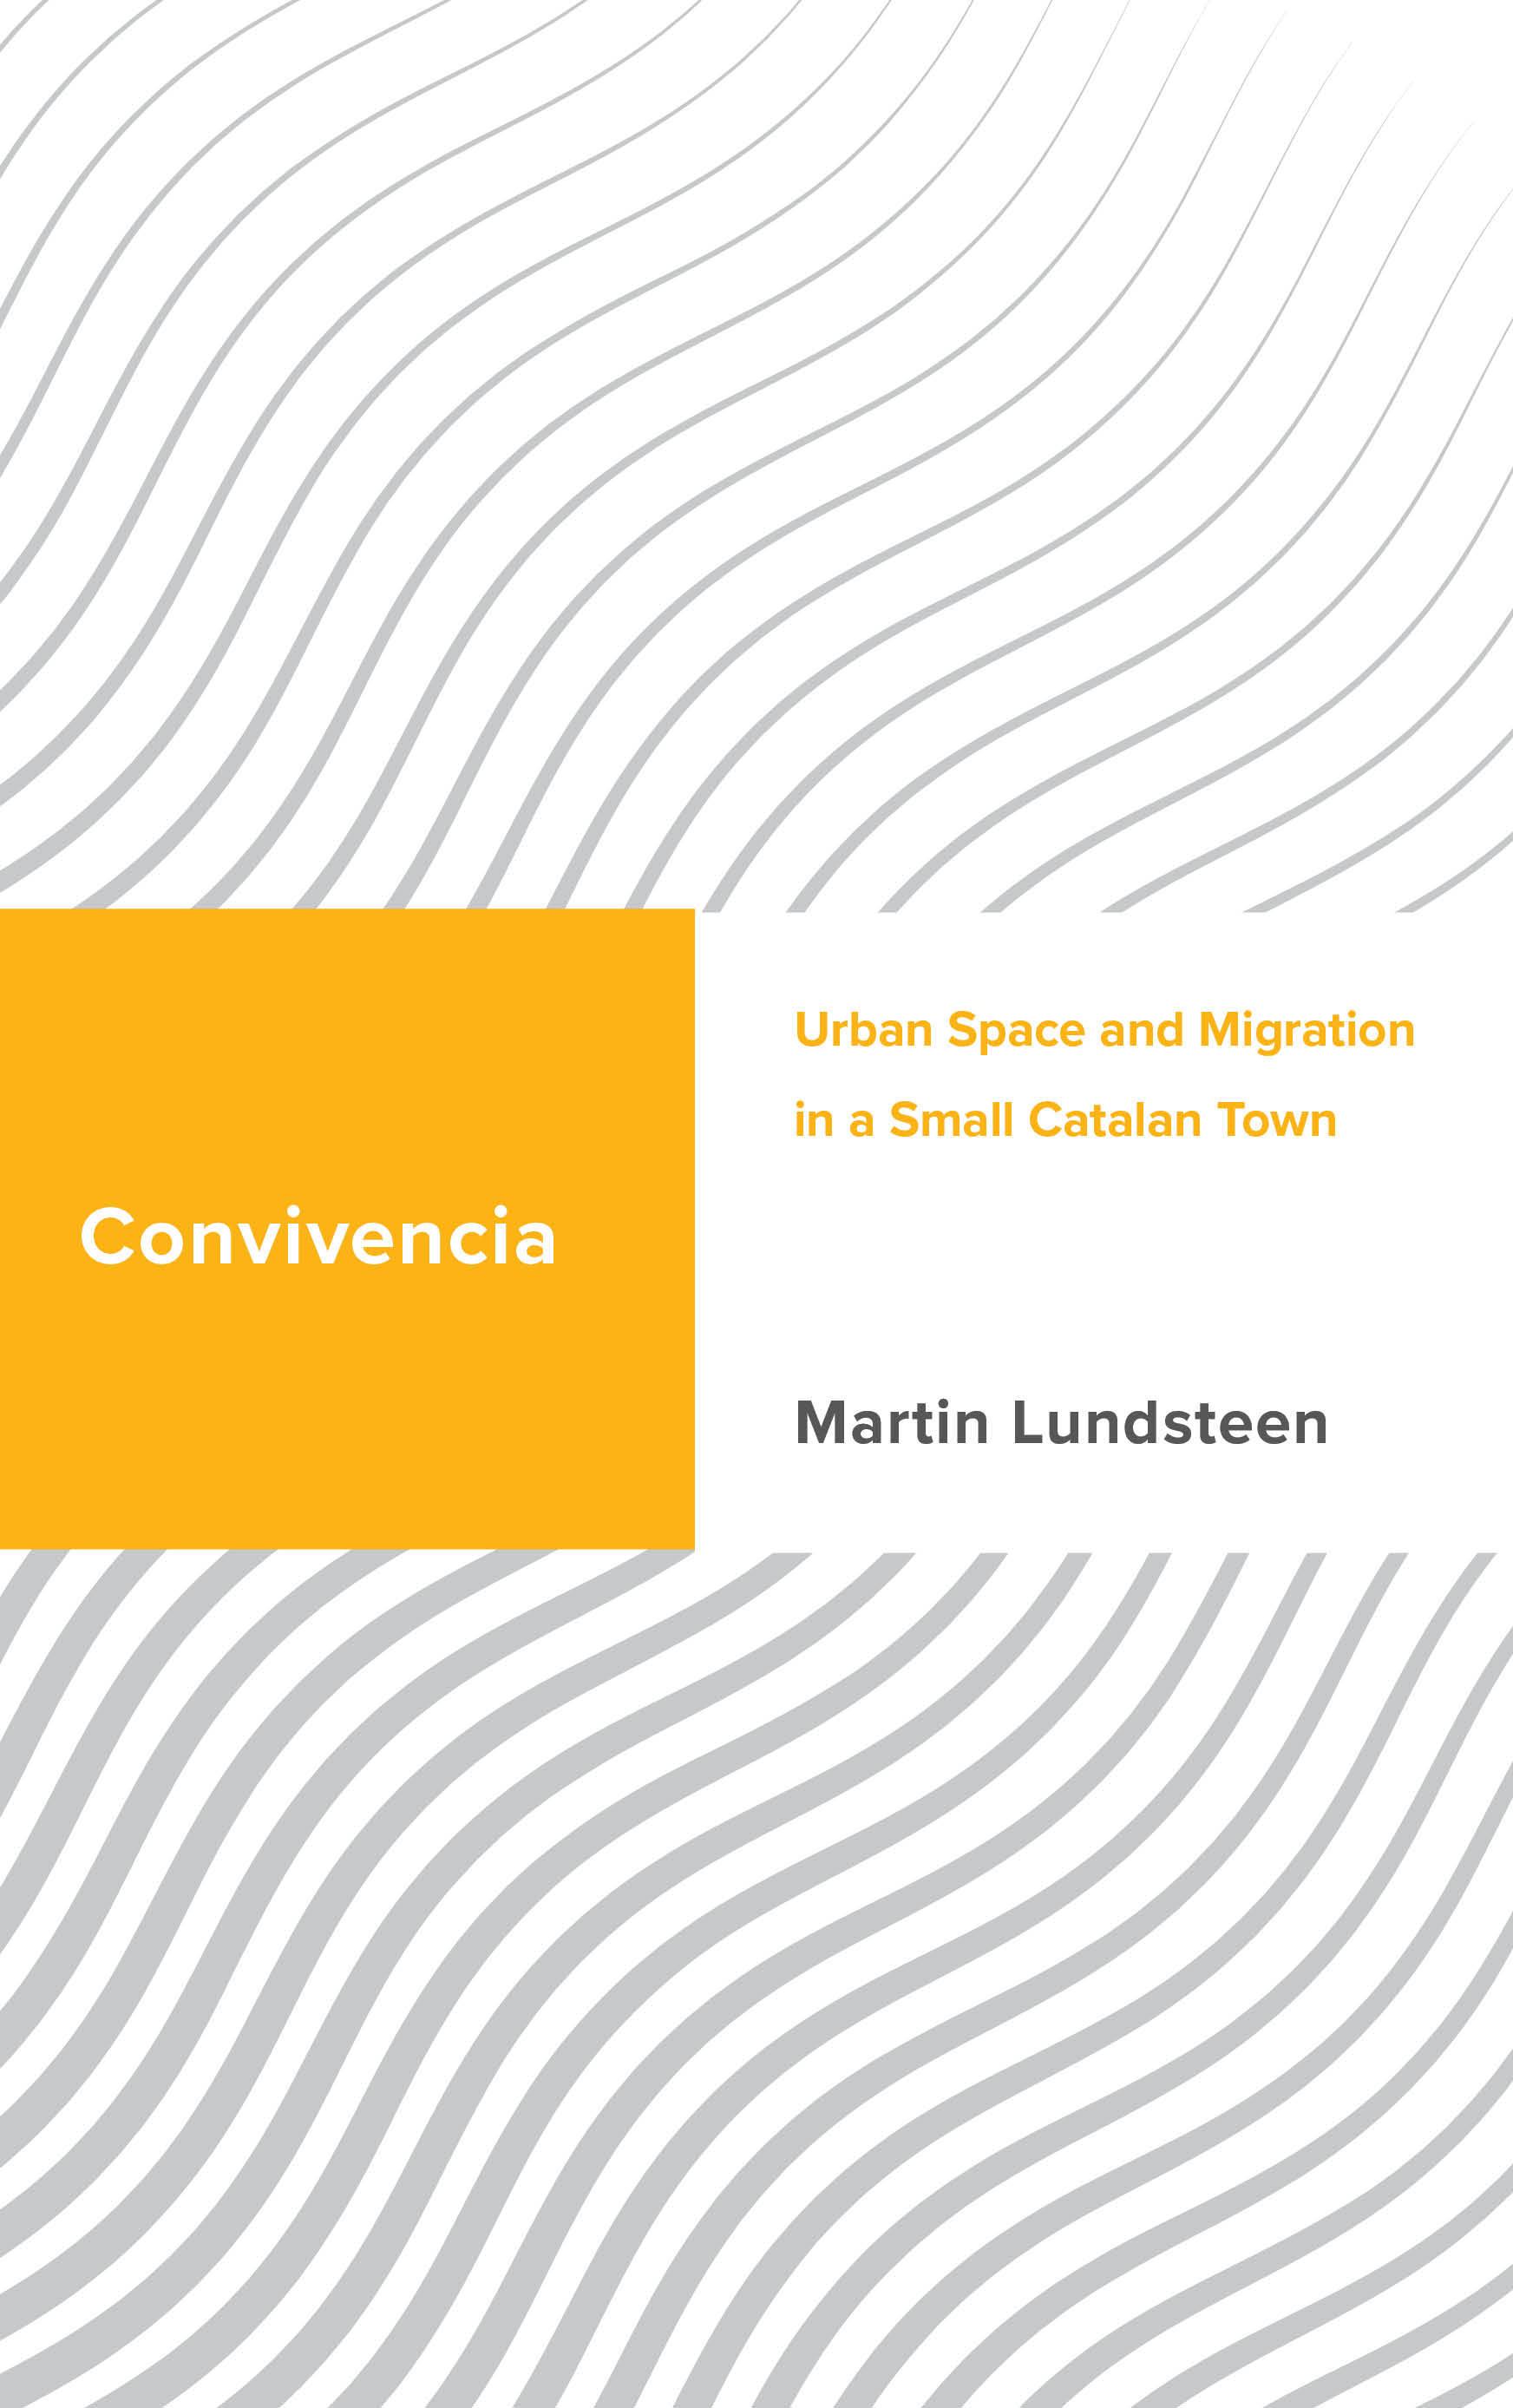 Convivencia: Urban Space and Migration in a Small Catalan Town